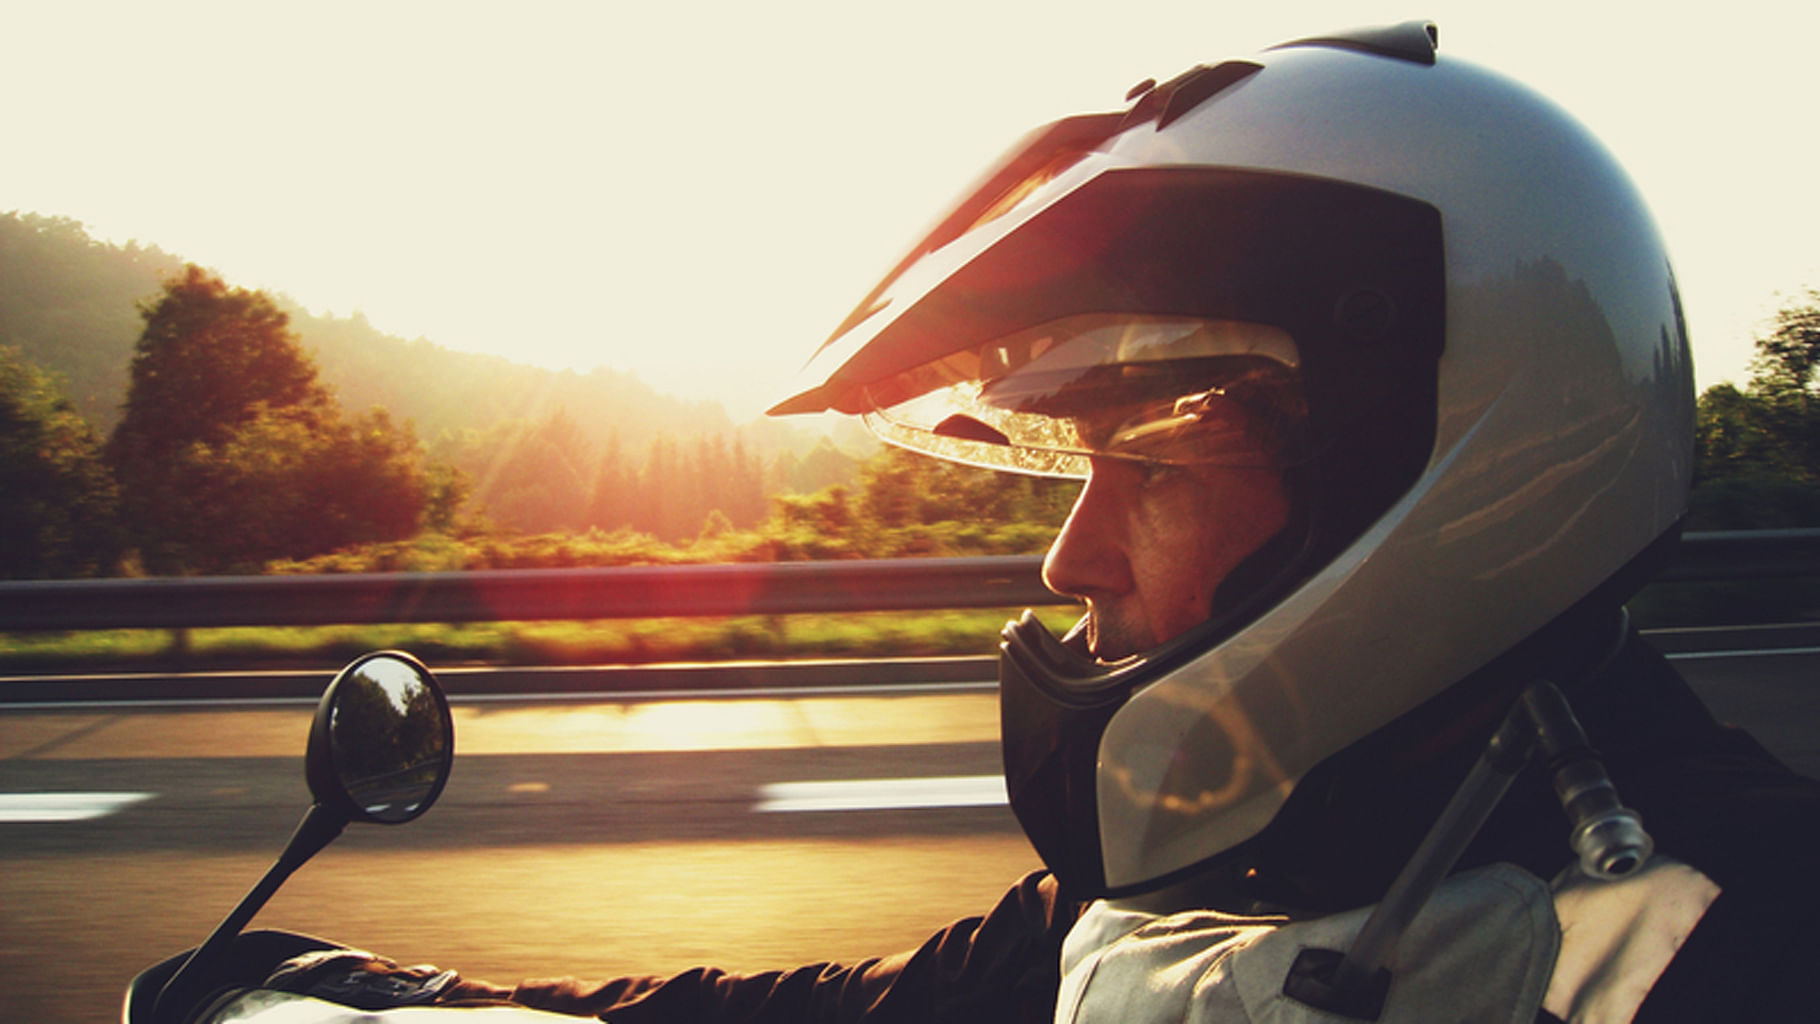 The ‘No helmet, no fuel’ rule was initially set to be implemented from 1 August, to reduce the casualties in road accidents. (Photo: iStockphoto)